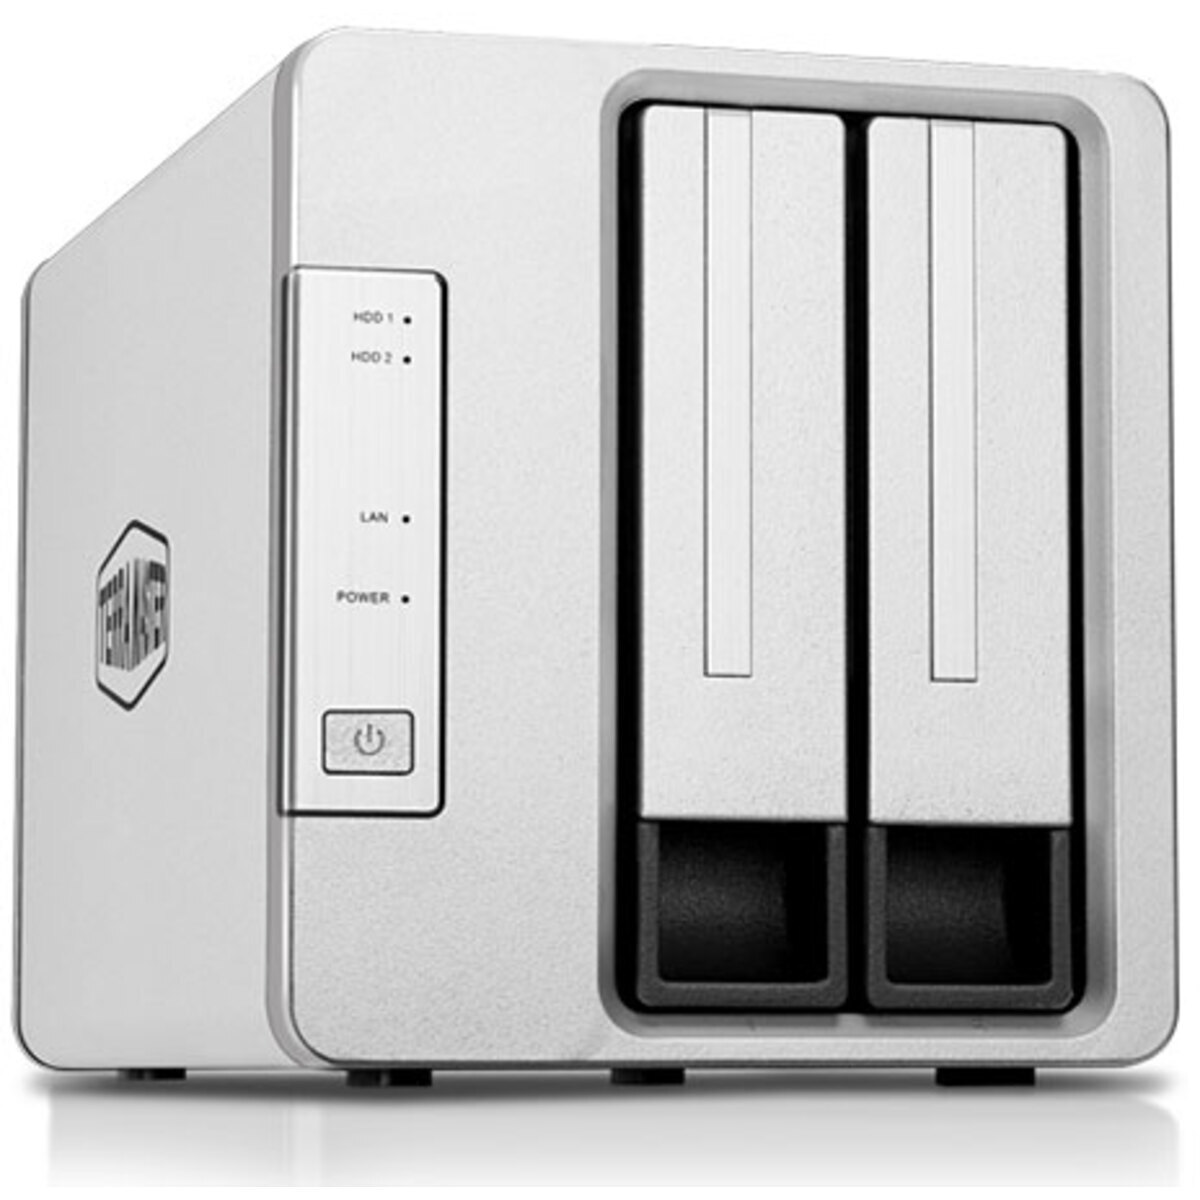 TerraMaster F2-223 2tb 2-Bay Desktop Personal / Basic Home / Small Office NAS - Network Attached Storage Device 1x2tb Crucial MX500 CT2000MX500SSD1 2.5 560/510MB/s SATA 6Gb/s SSD CONSUMER Class Drives Installed - Burn-In Tested - FREE RAM UPGRADE F2-223